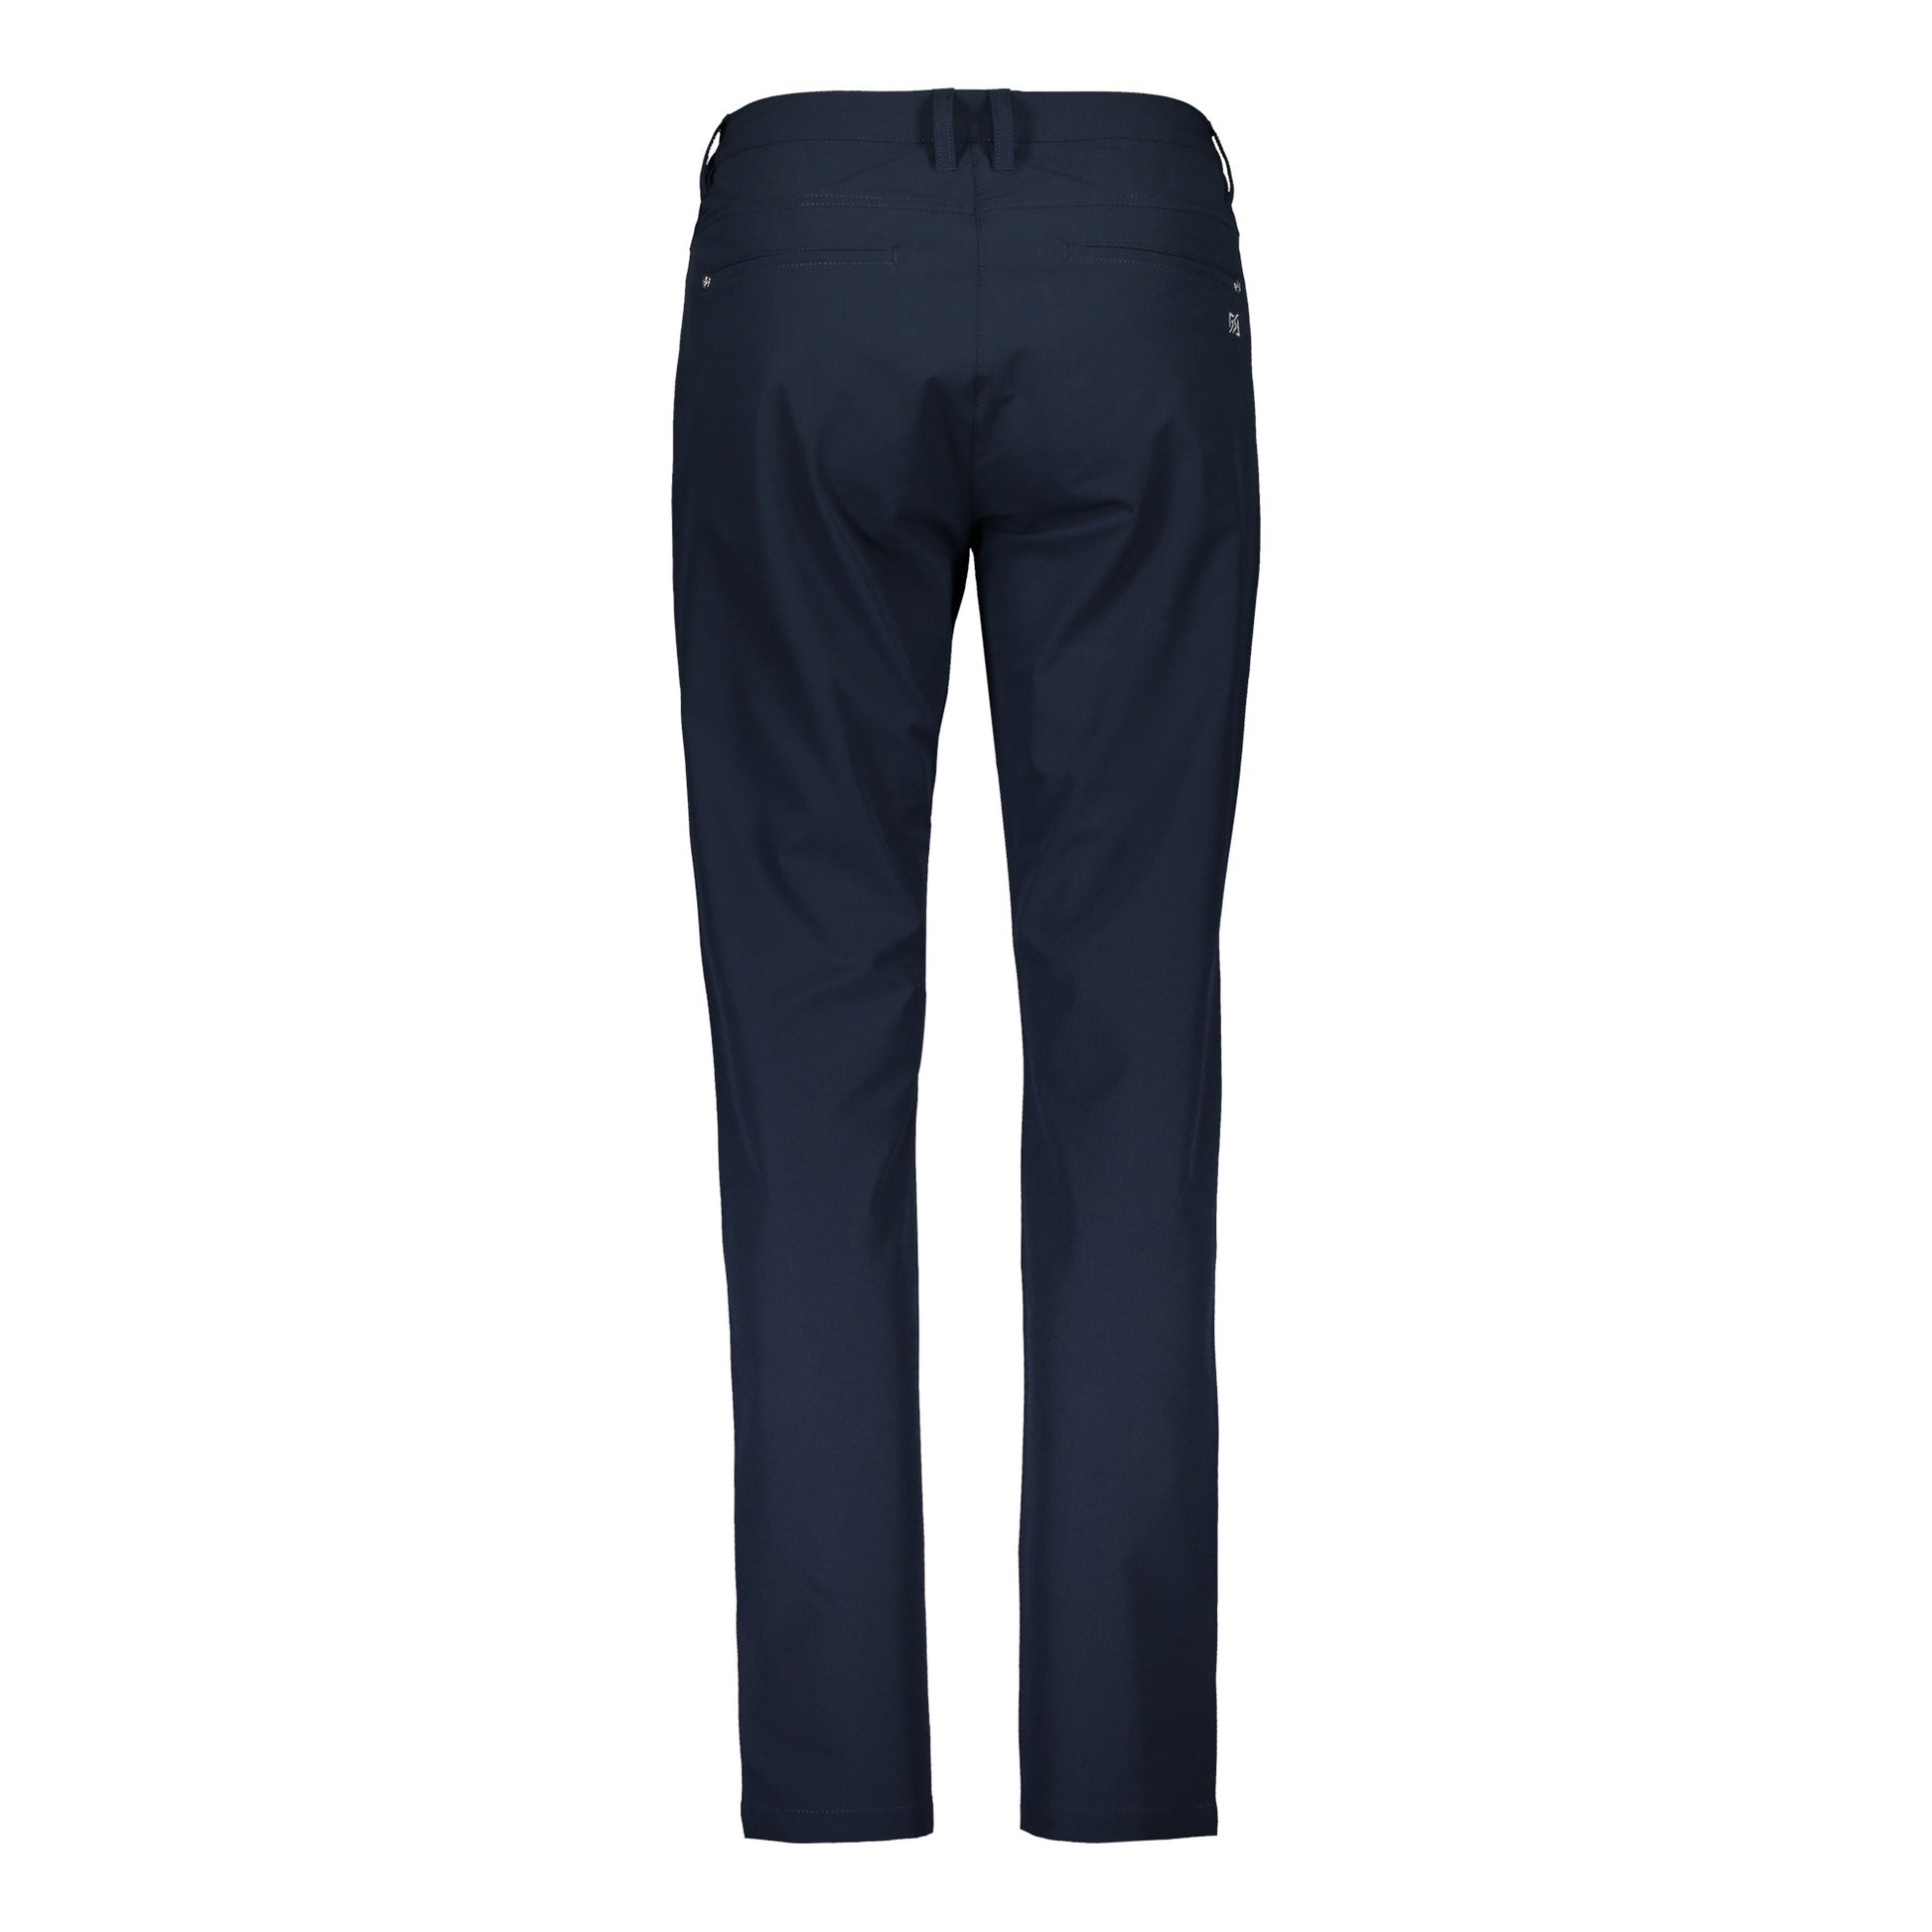 803121 Catmandoo Timea Ladies Navy Stretch Trousers Product Image Rear